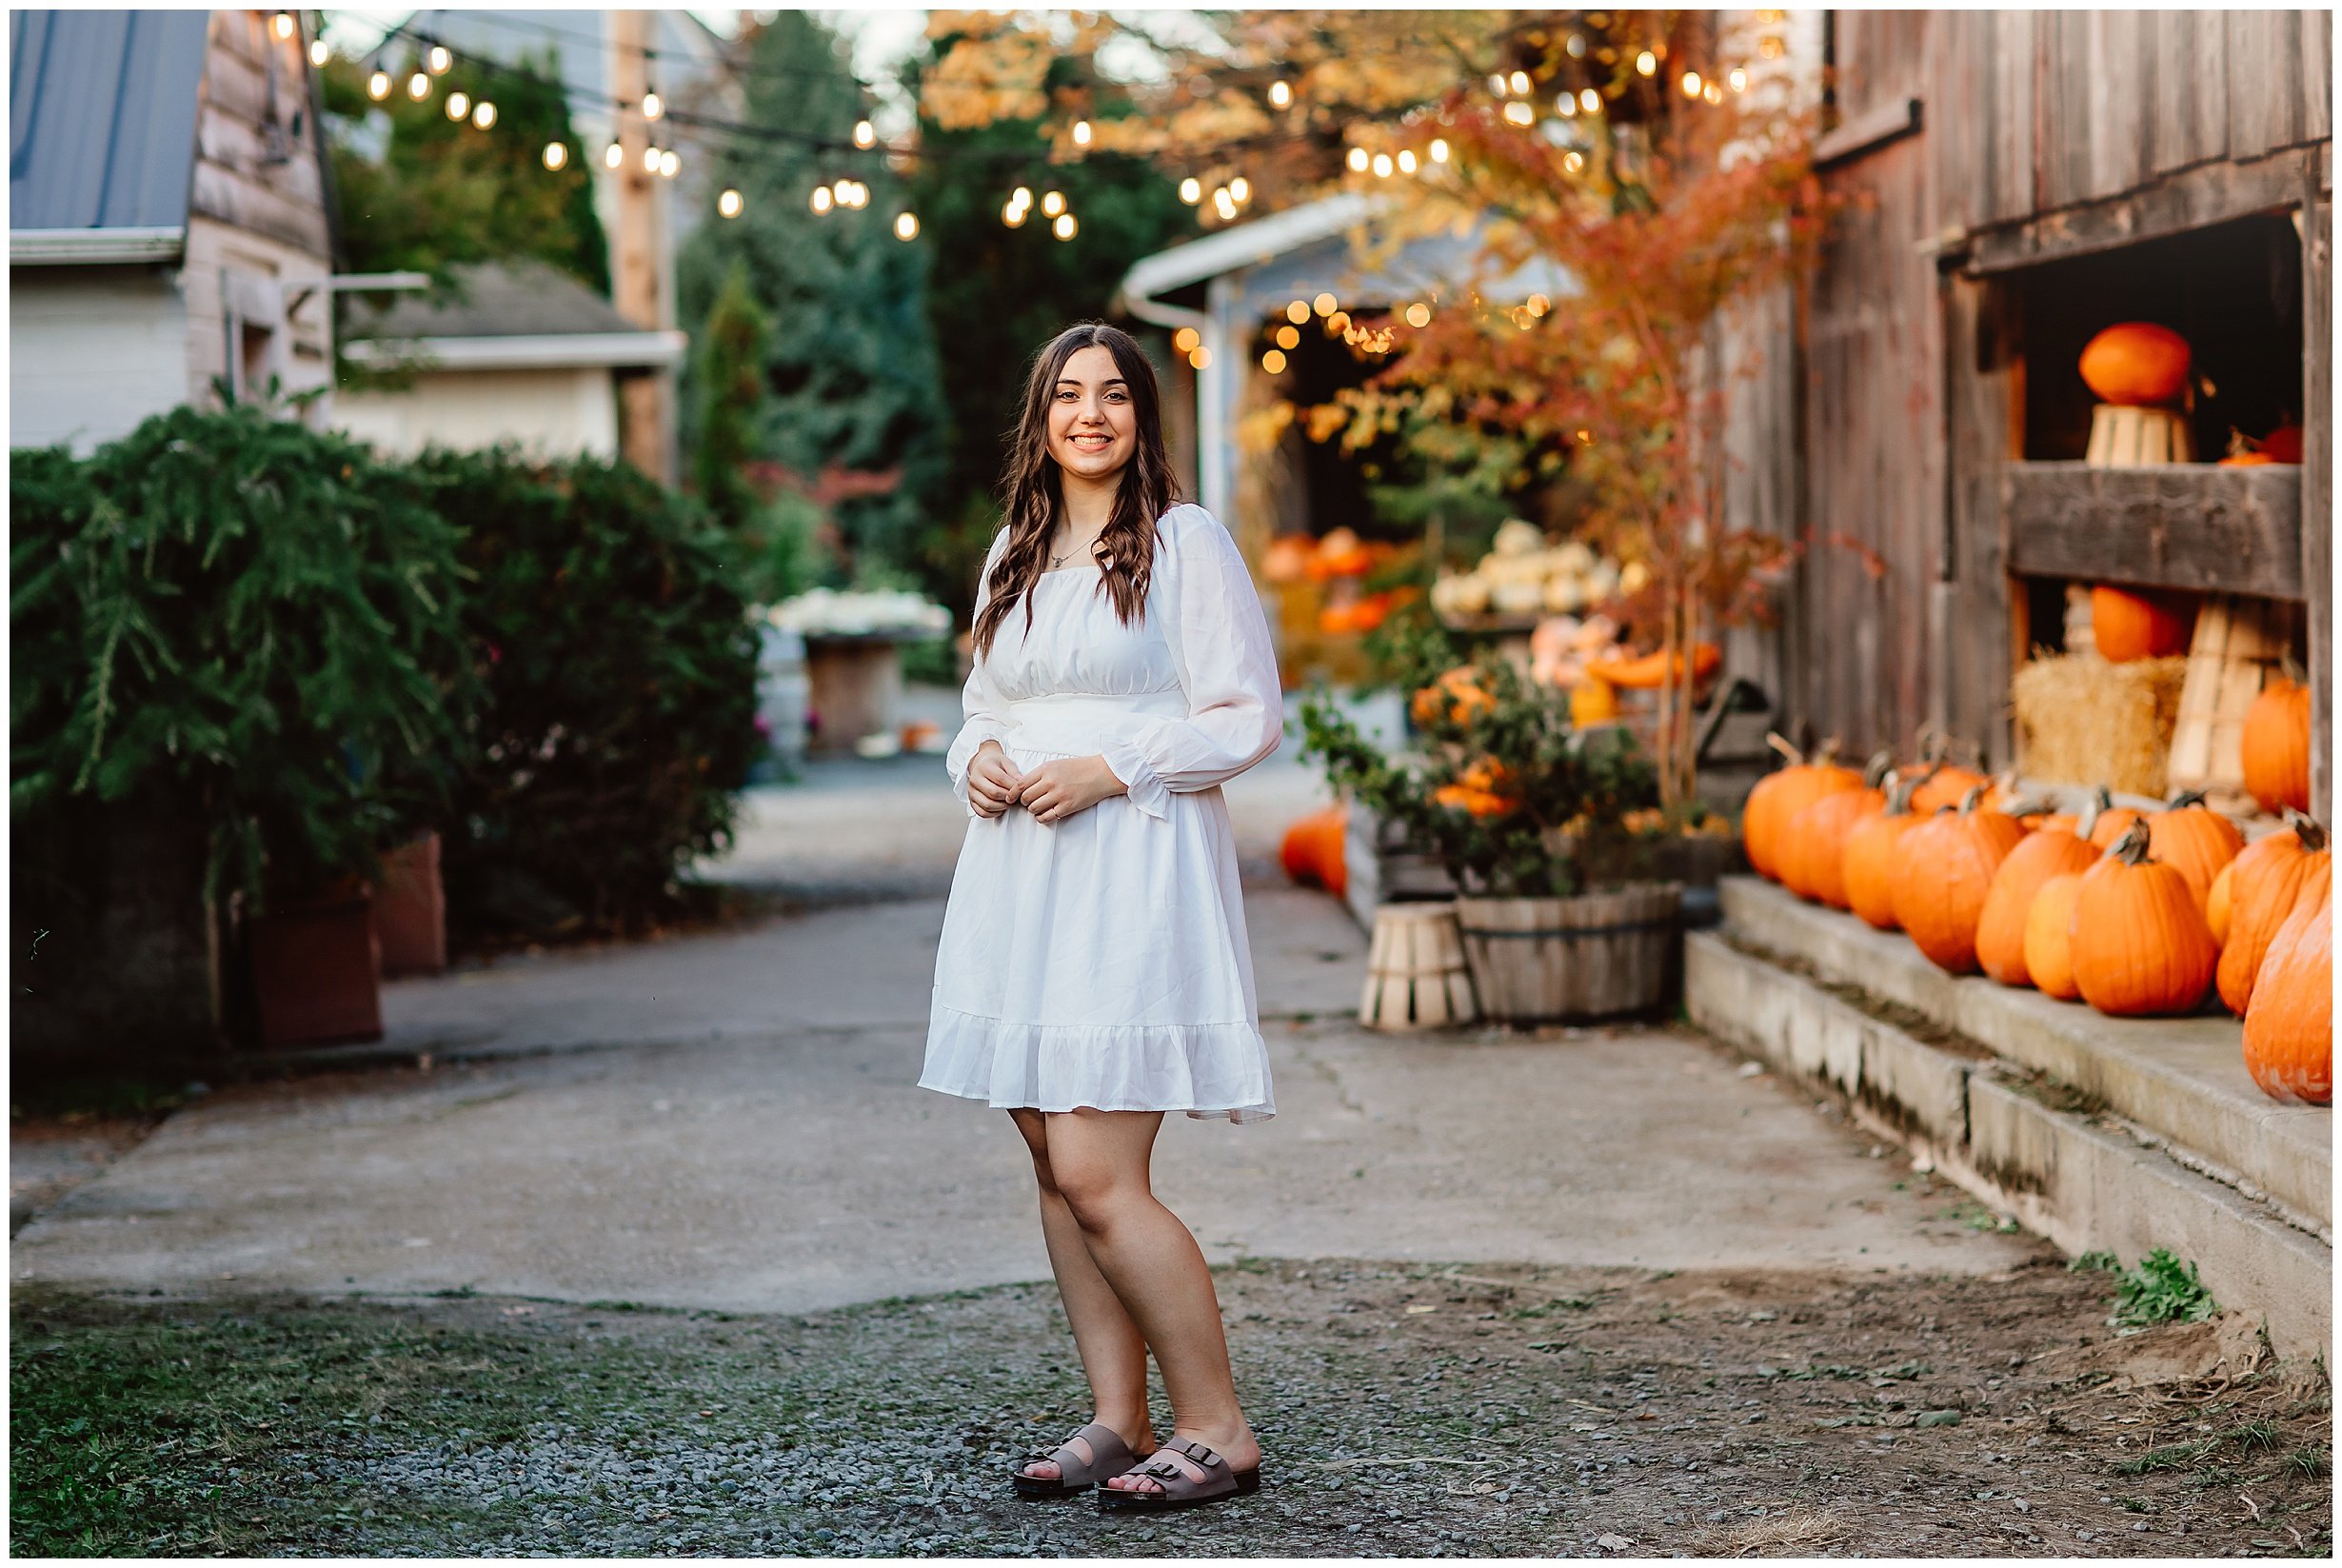  high school senior standing in a white dress smiling at the camera with string lights and pumpkins in the background 